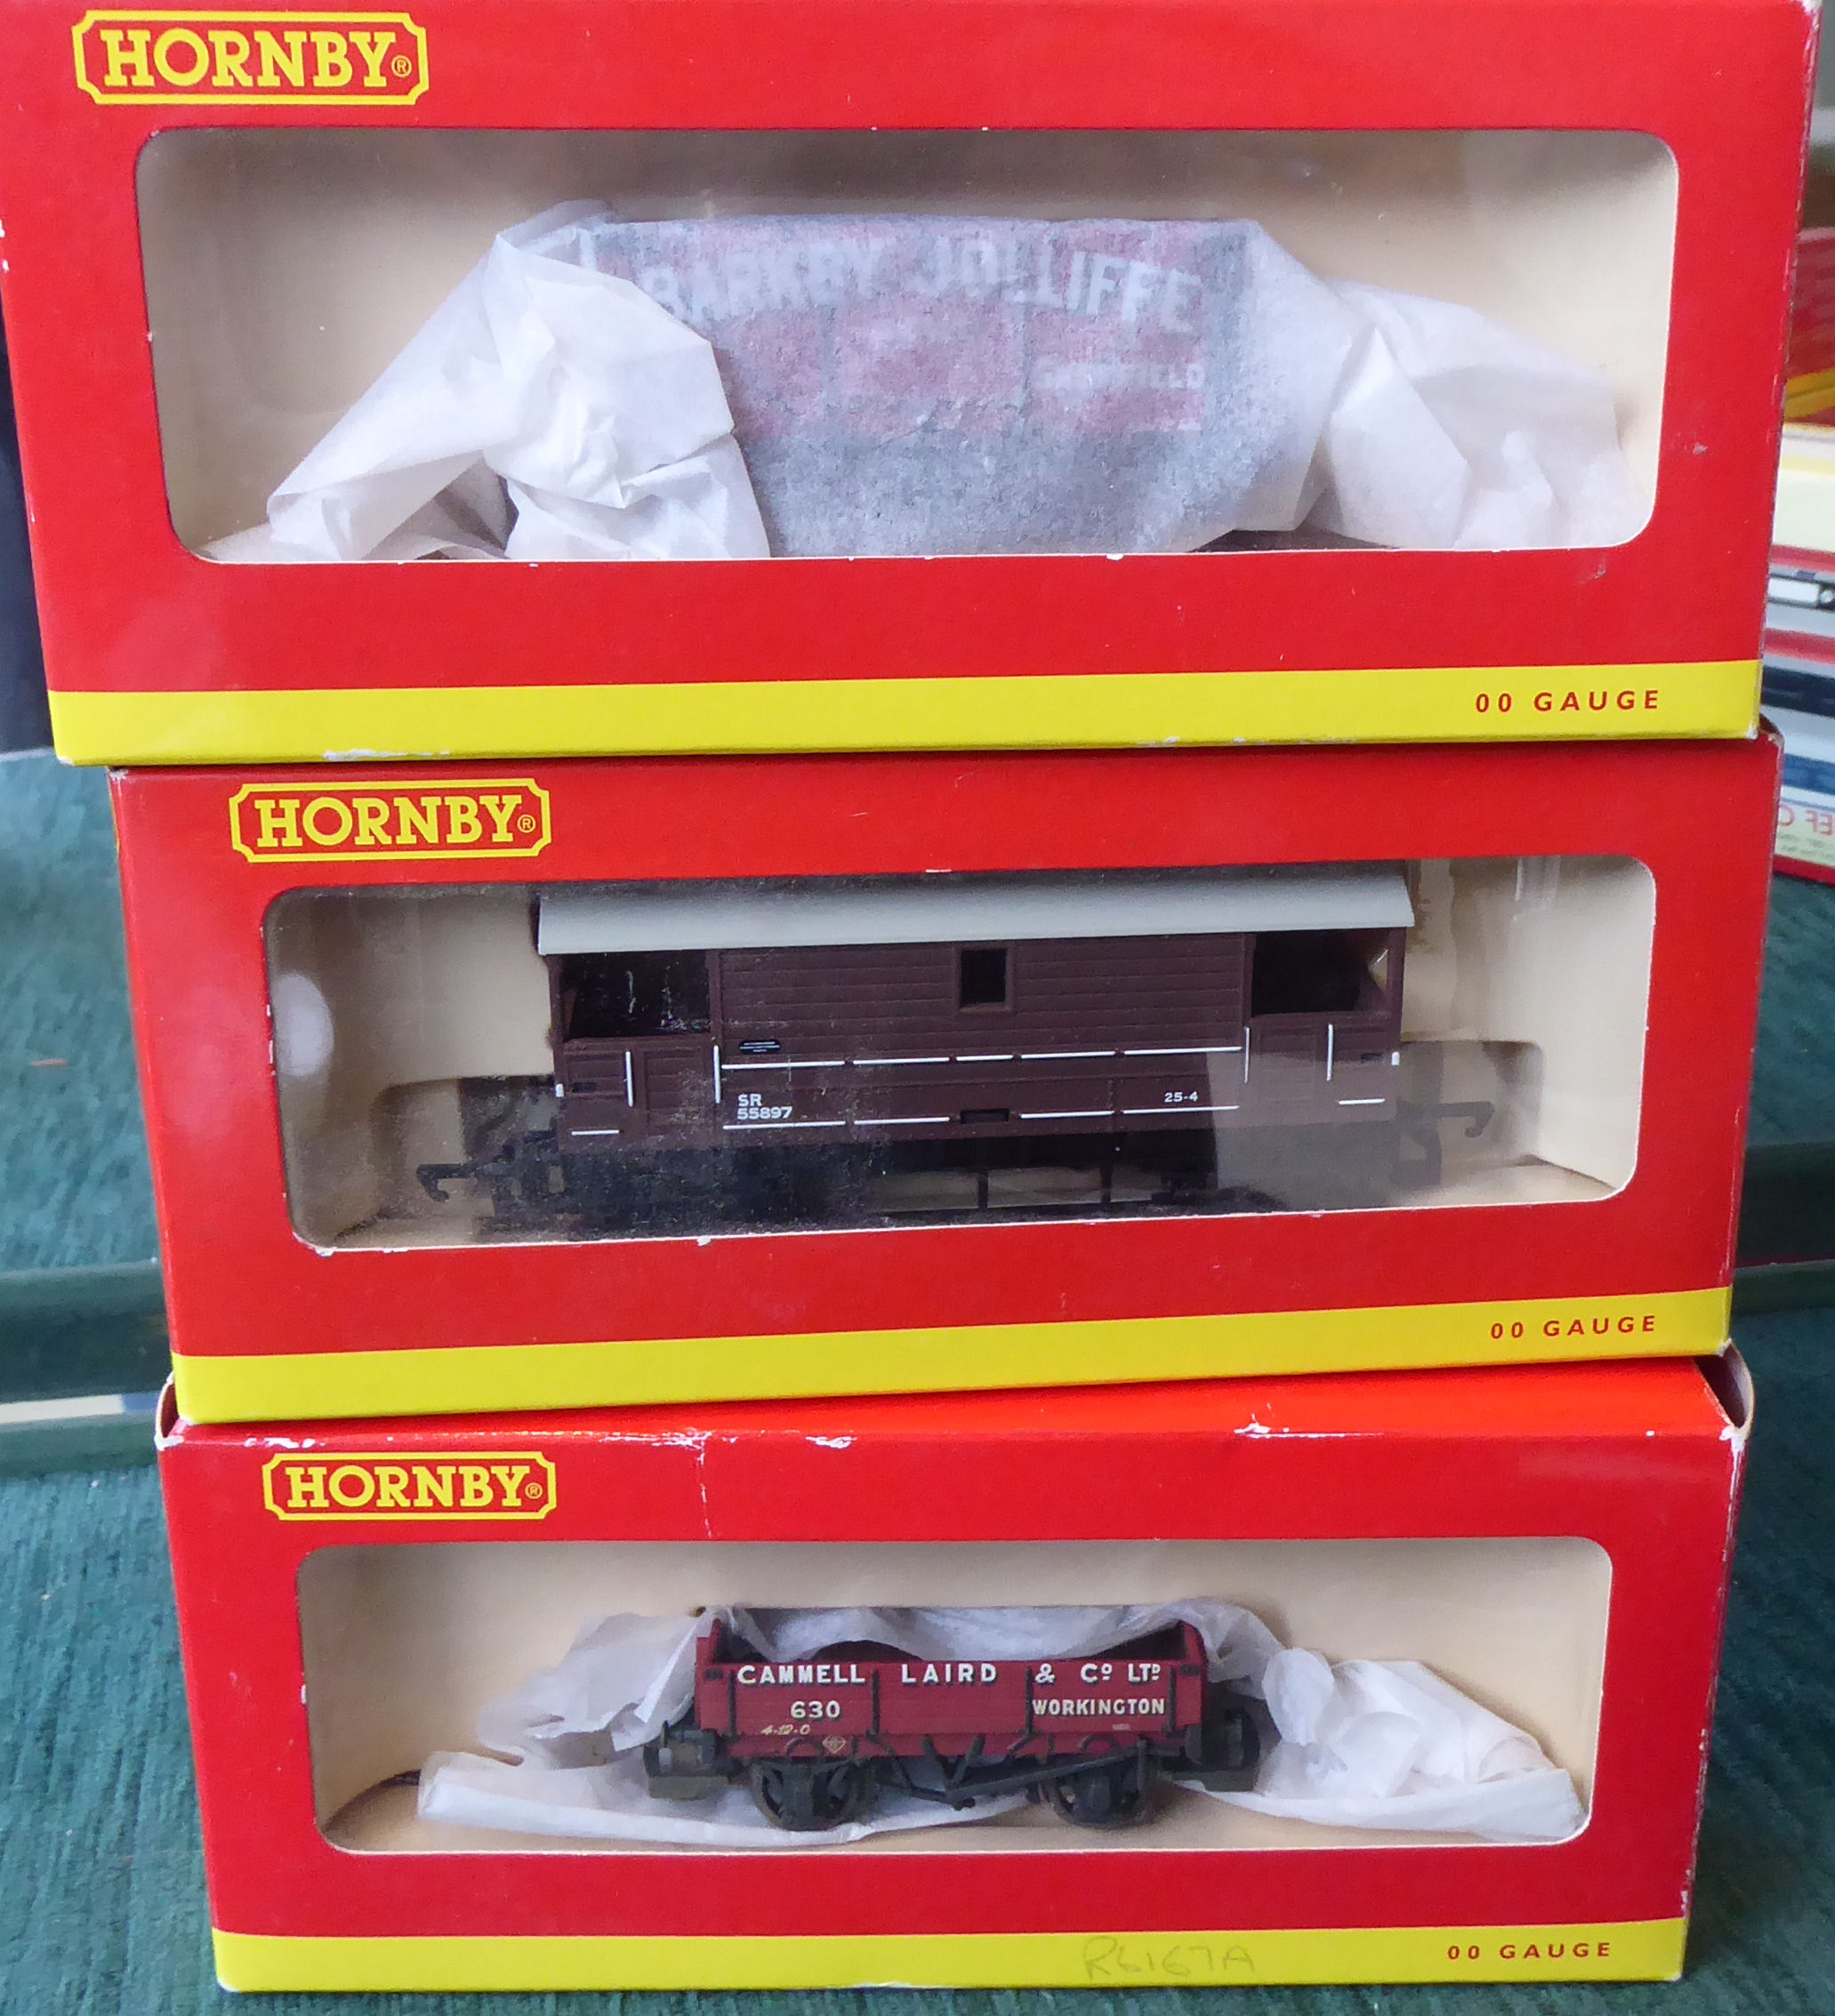 Hornby 00 gauge accessories: to include wagons, rolling stock, track, a buffer stop and accessories - Image 5 of 6